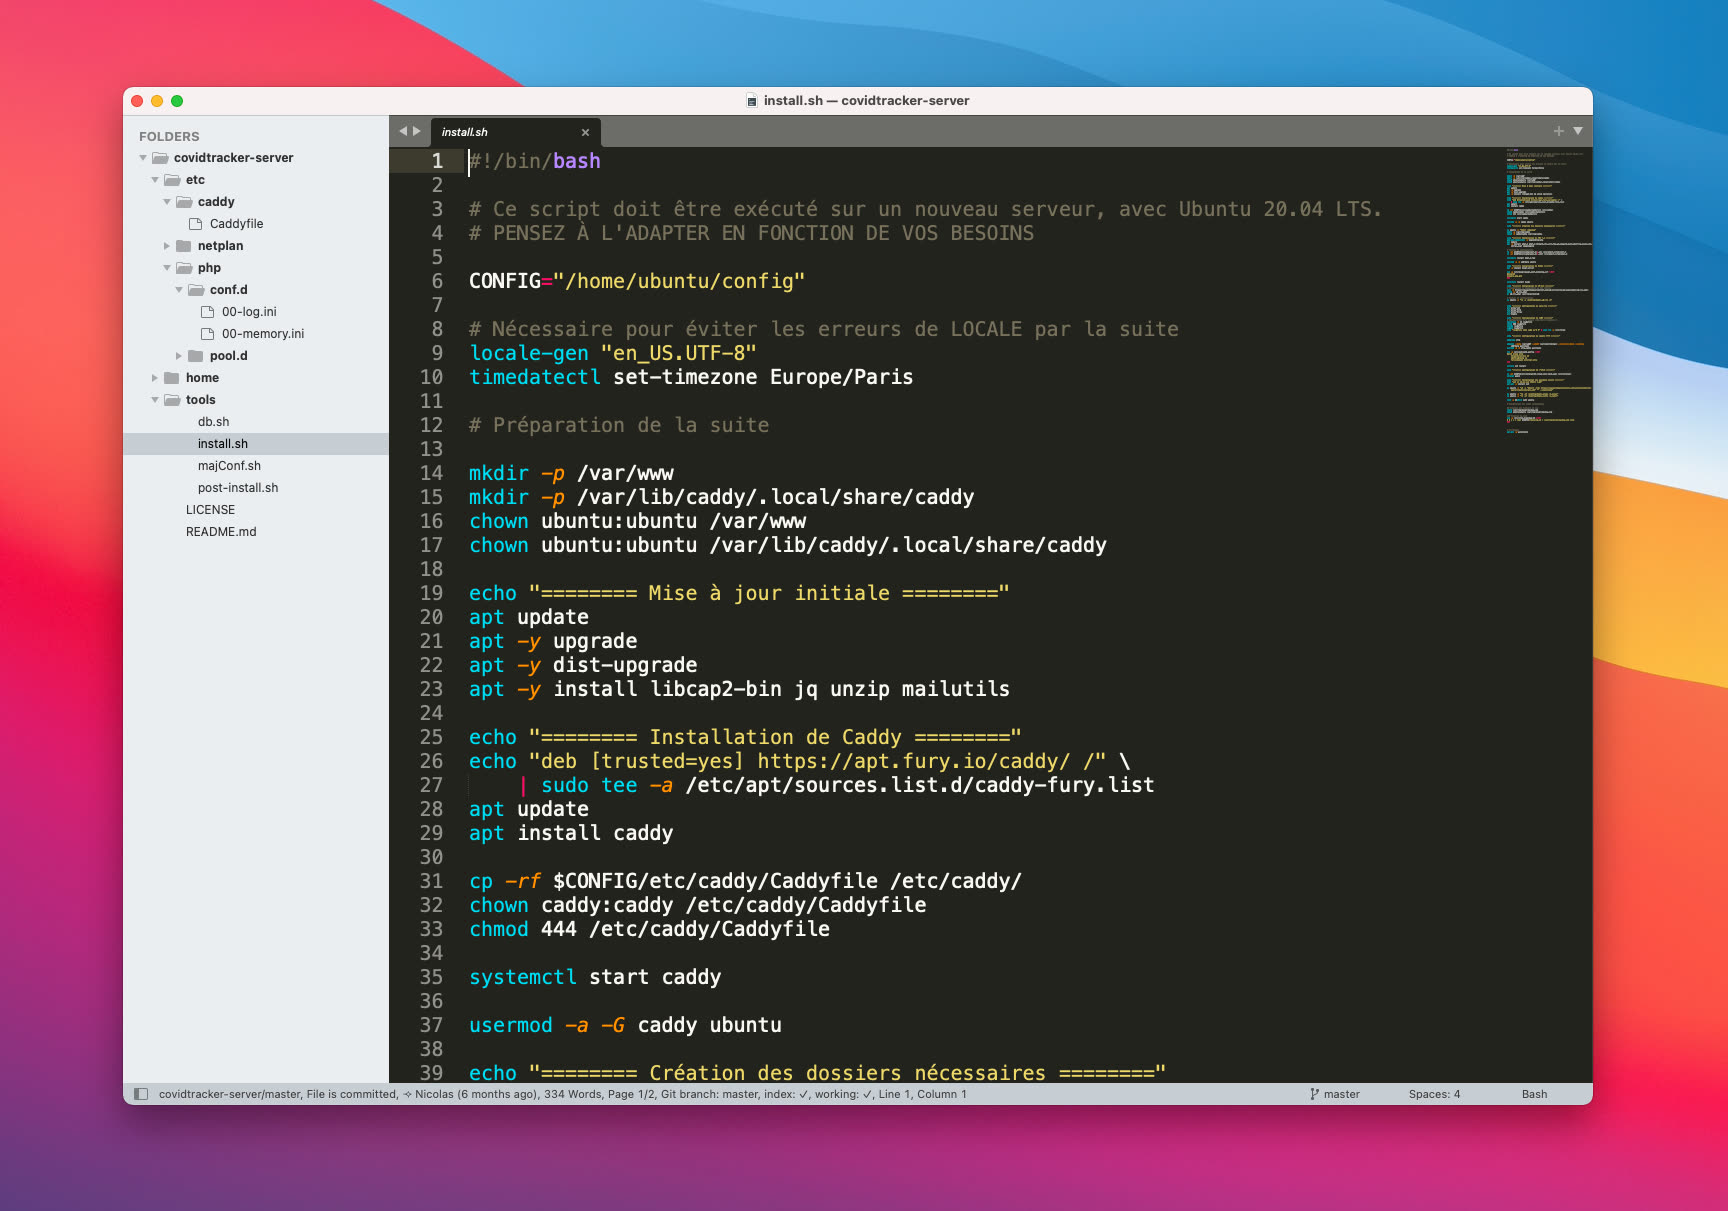 download the last version for apple Sublime Text 4.4151